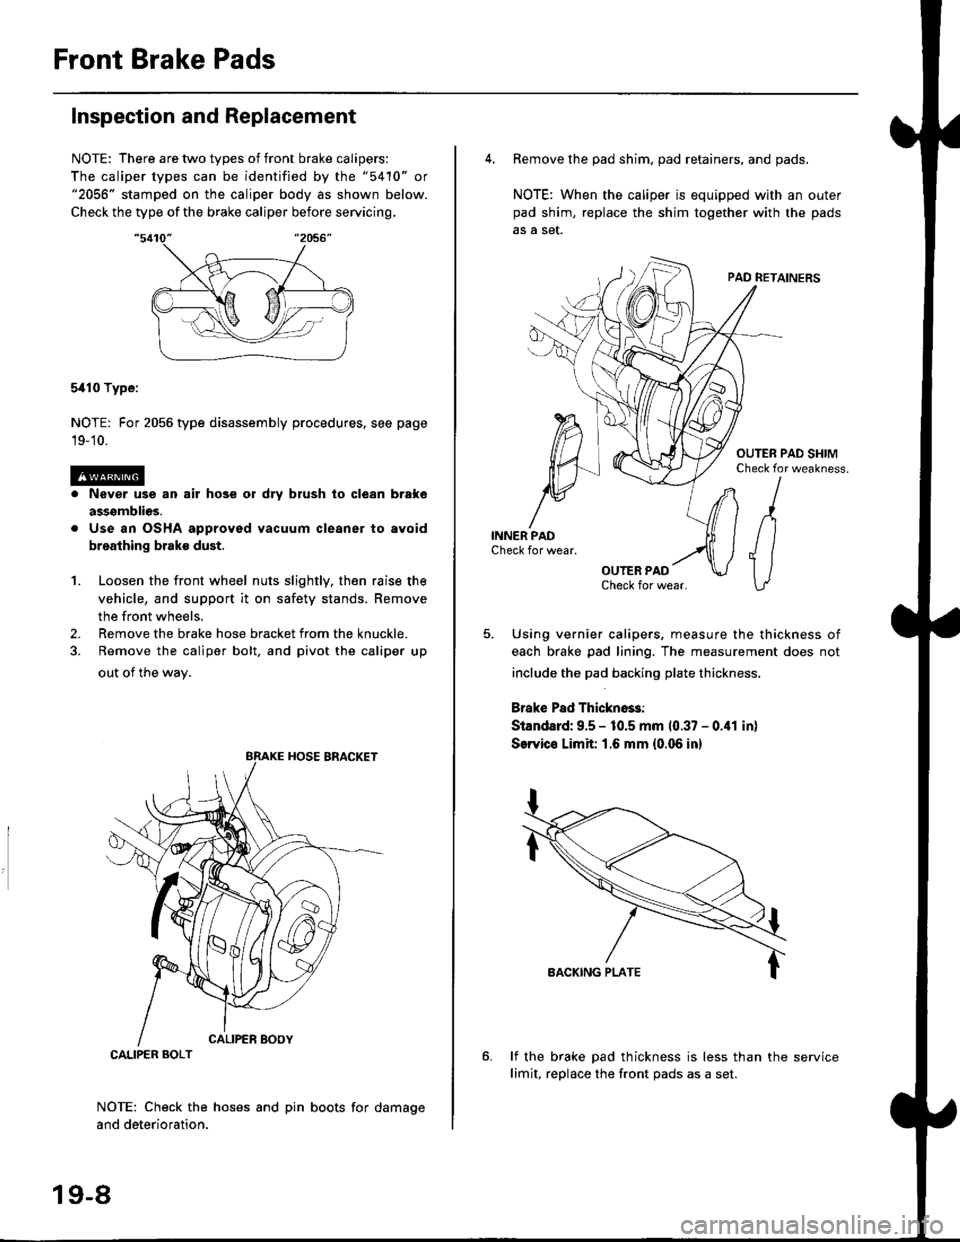 HONDA CIVIC 1999 6.G Workshop Manual Front Brake Pads
Inspection and Replacement
NOTE: There are two types of front brake calipers:
The caliper types can be identified by the "5410" or"2056" stamped on the caliper body as shown below.
Ch